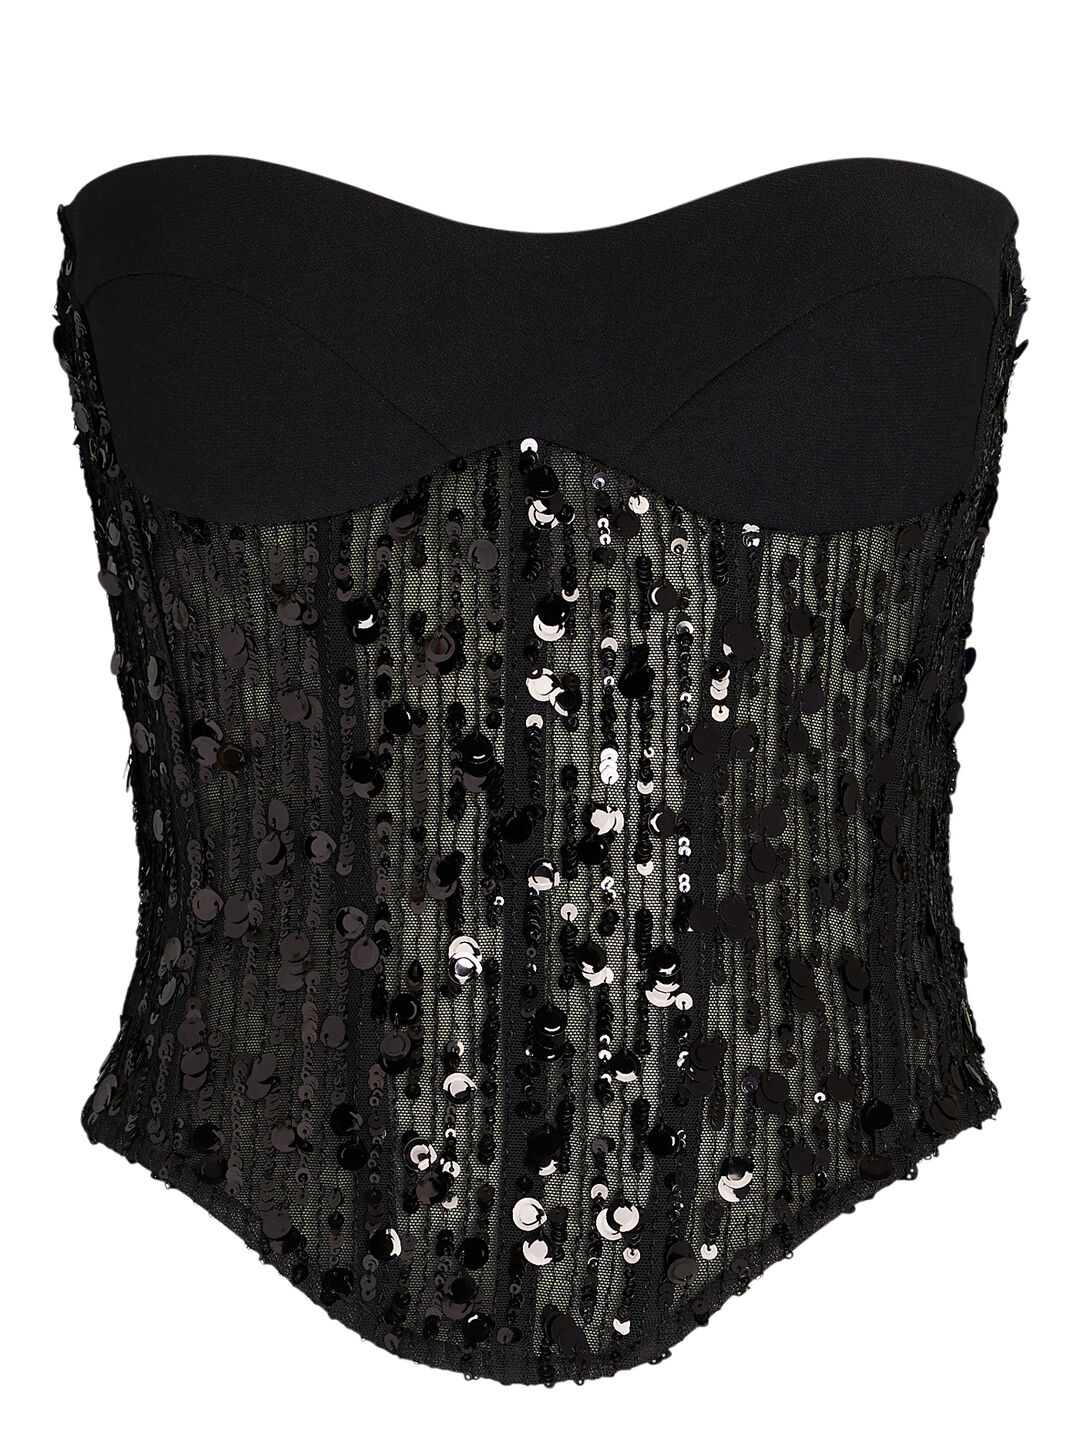 Strapless Sequined Bustier Top